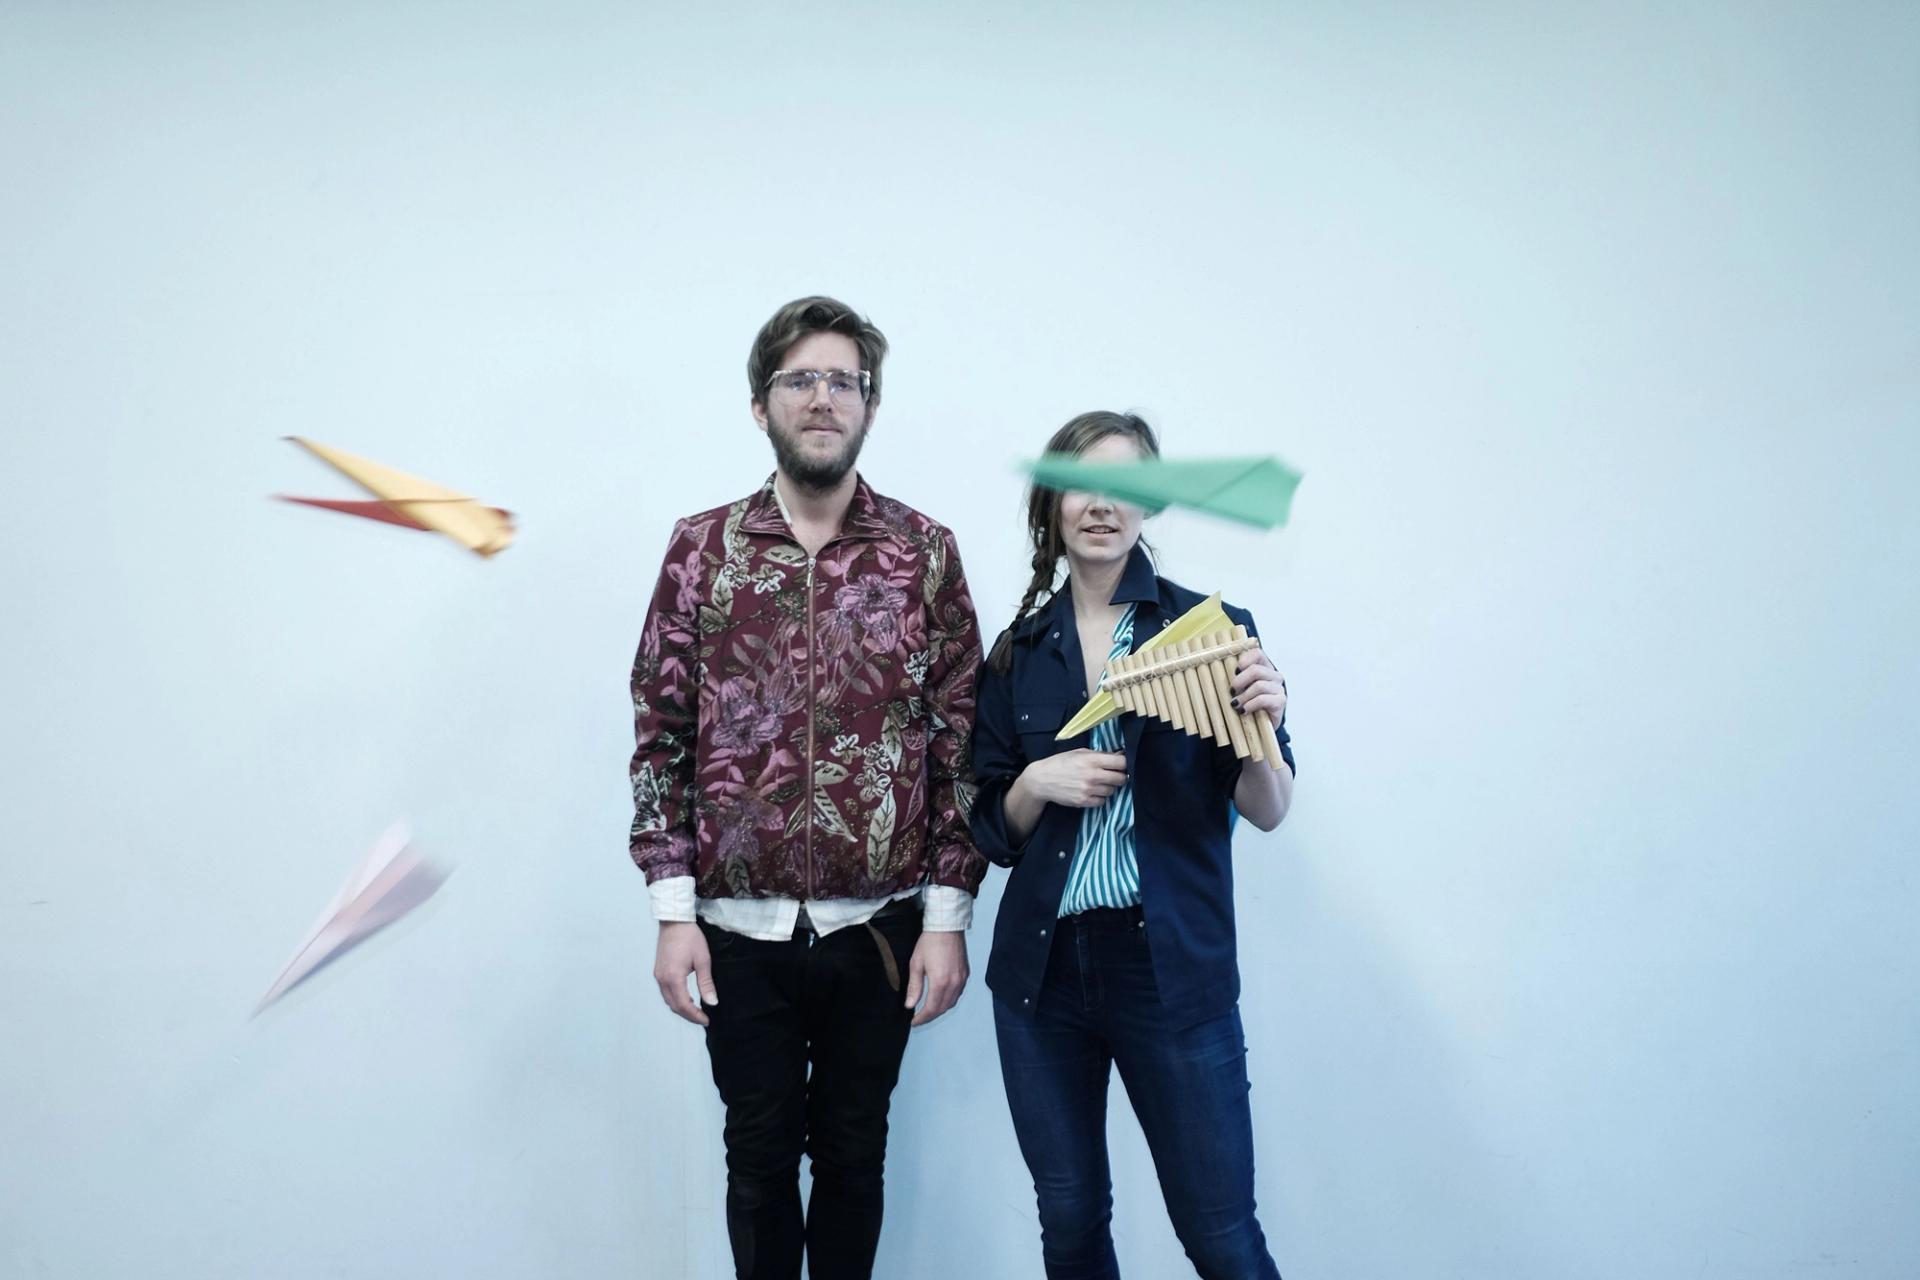 Lasse and Ingrid are standing smiling against a light blue backdrop. Ingrid is holding a panflutes and around them are flying paper planes, one of which happens to partially cover Ingrid's face. 